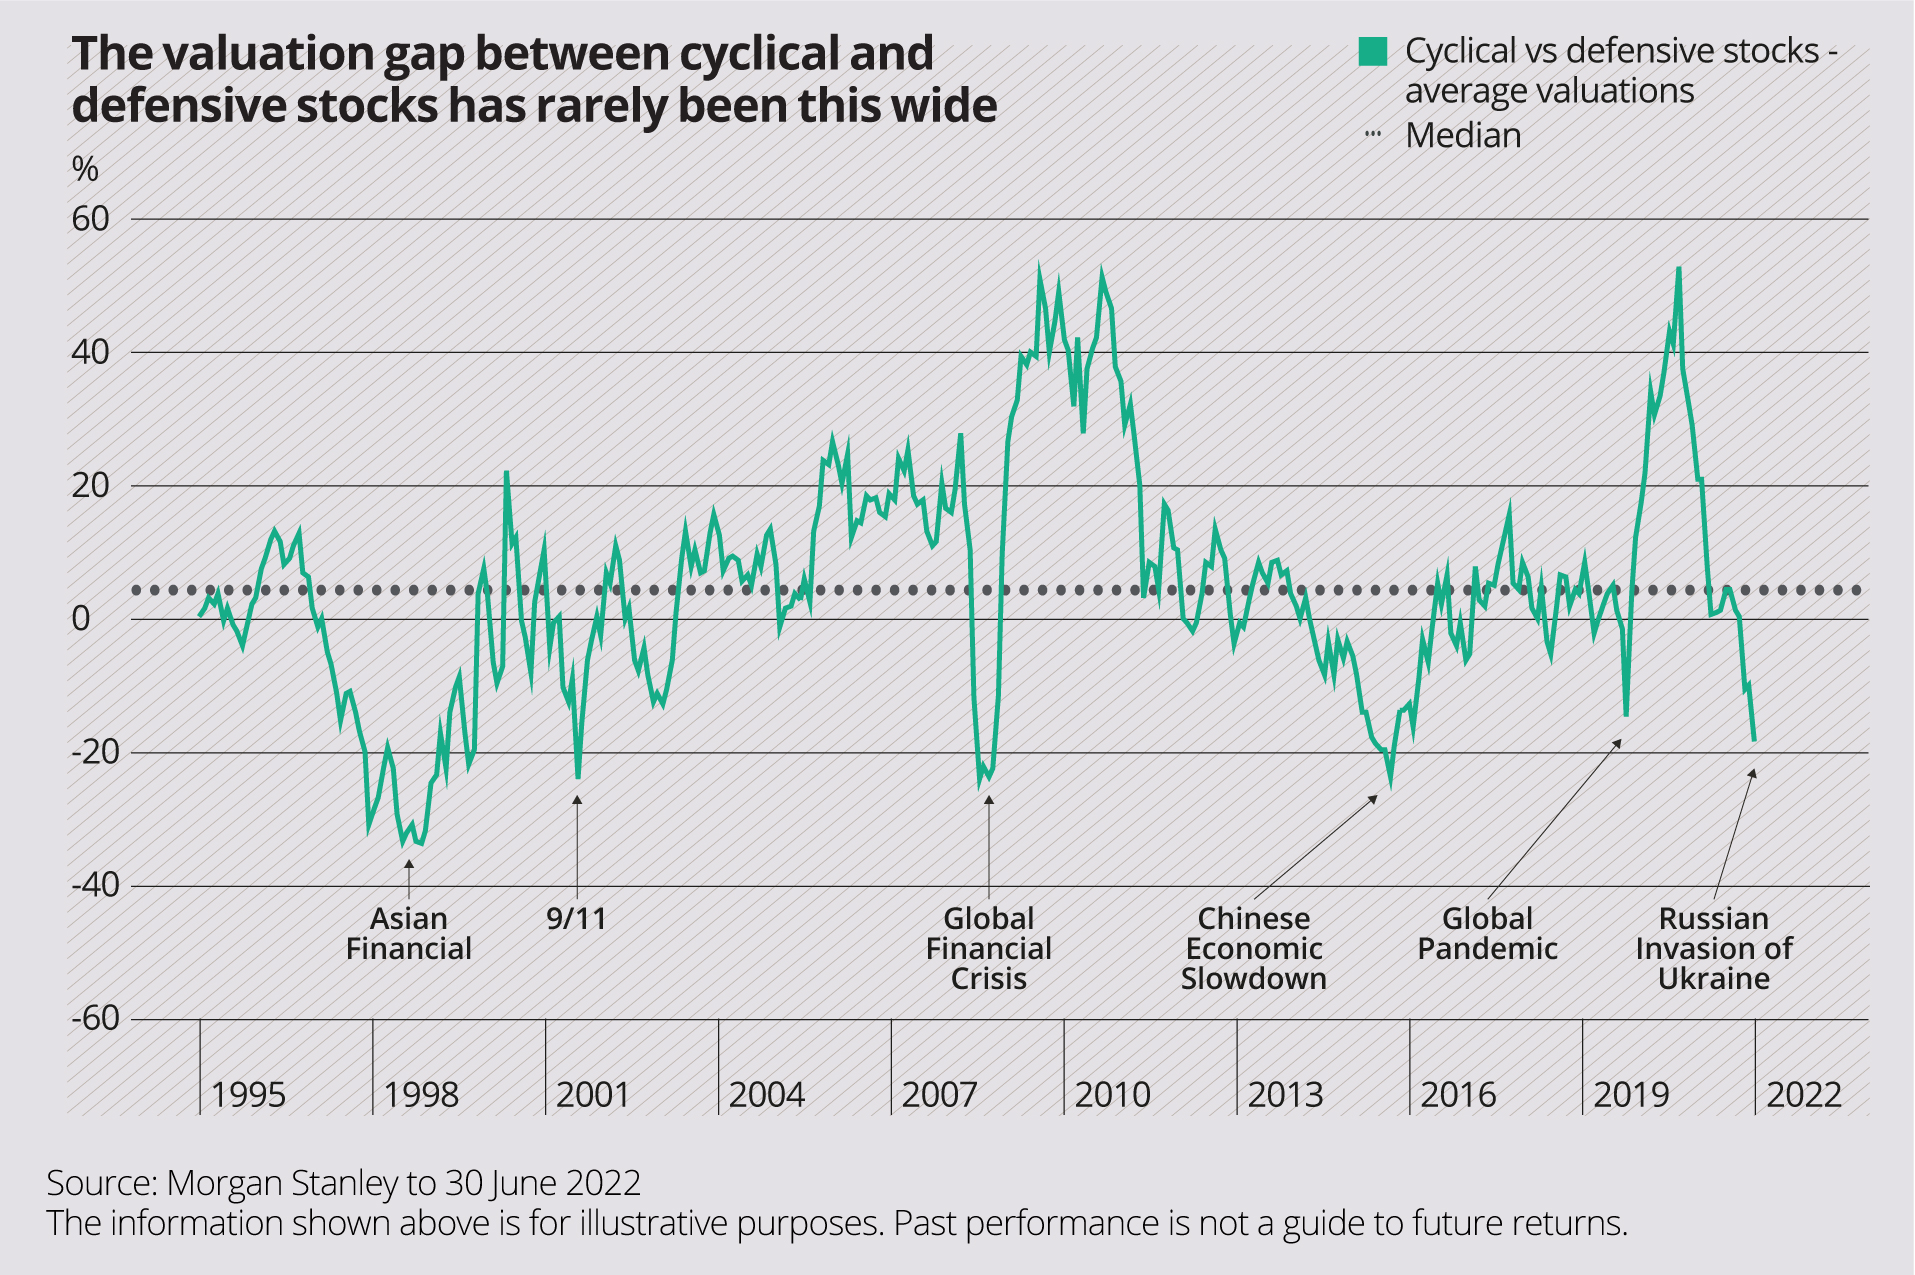 The valuation gap between cyclical and defensive stocks has rarely been this wide